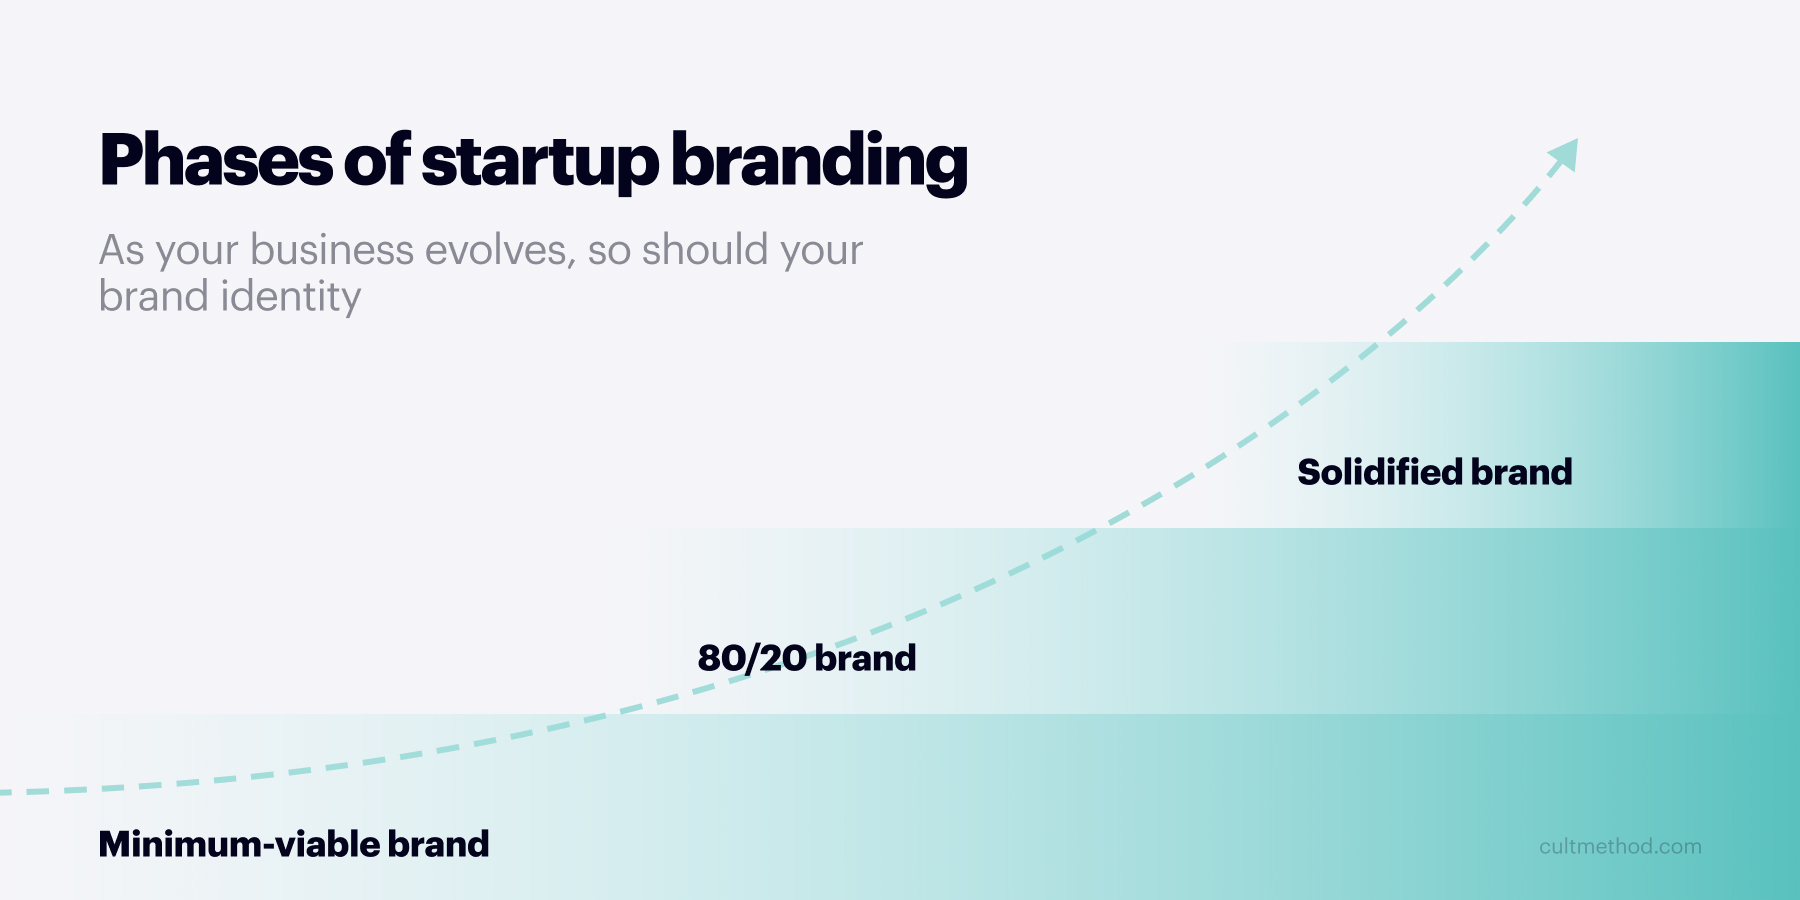 Brand maturation ladder: the three stages of startup branding